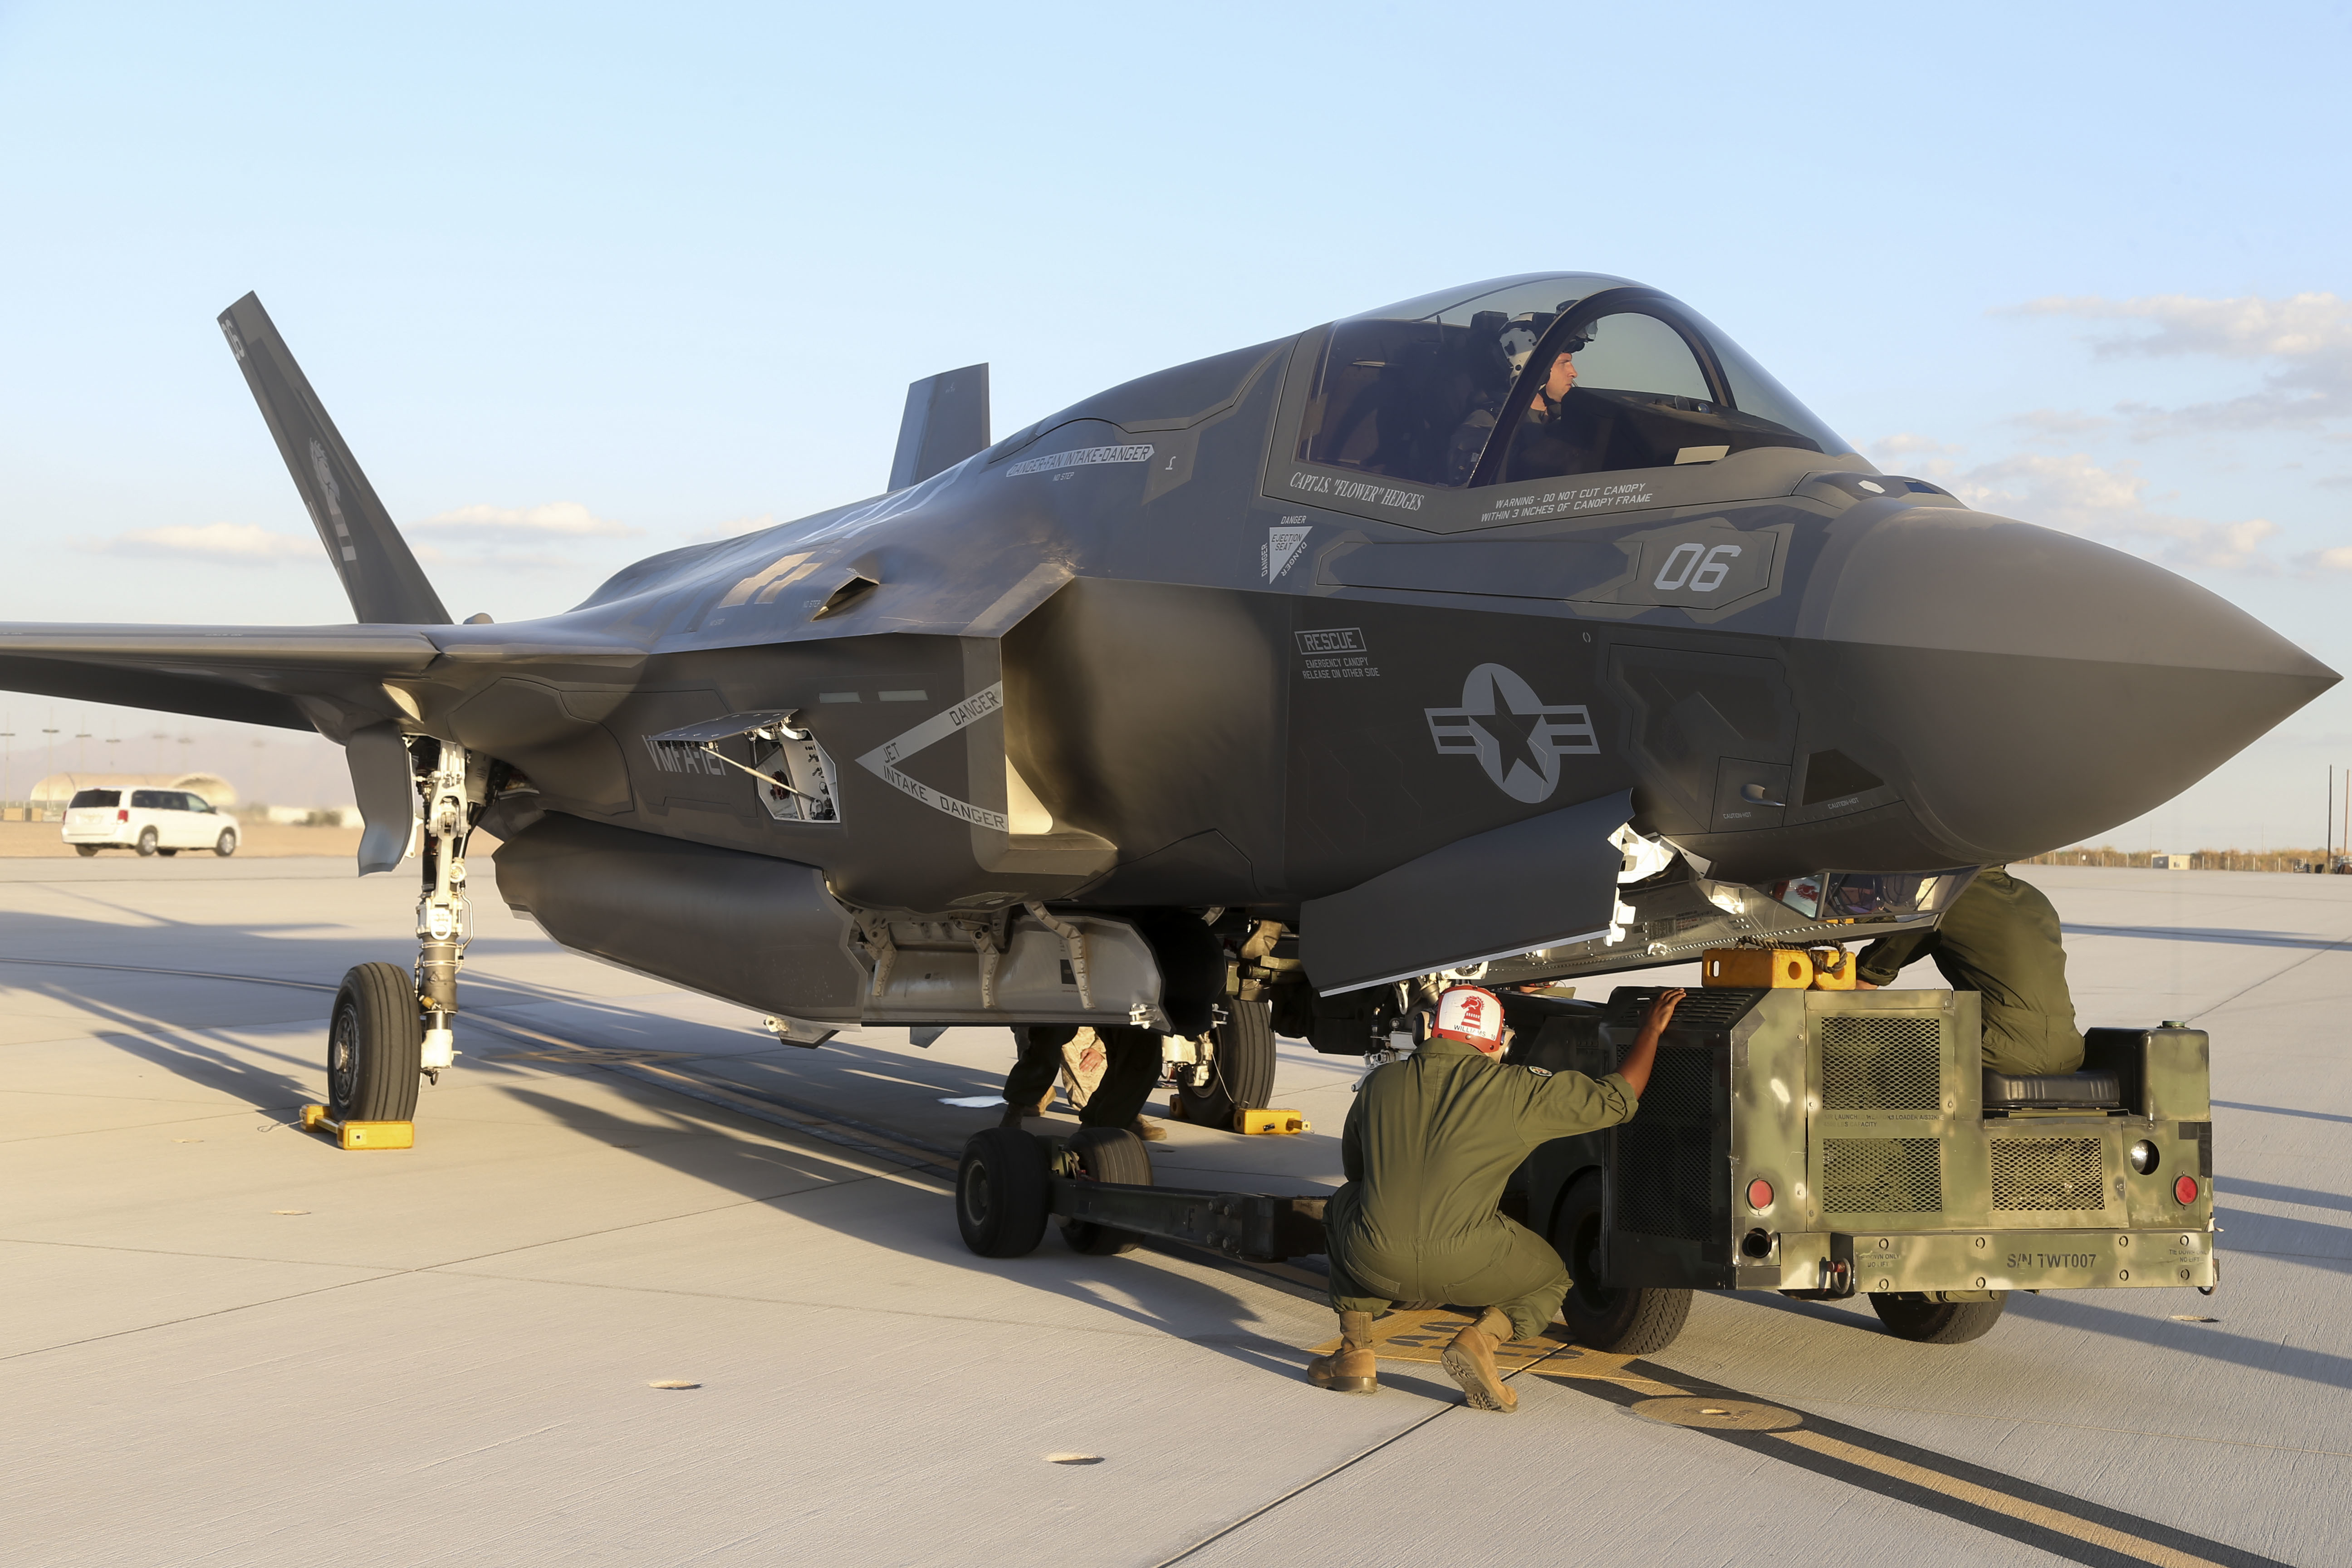 U.S. Marines with Marine Fighter Attack Squadron 121 (VMFA-121), 3rd Marine Aircraft Wing, conduct the first ever hot load on the F-35B Lightning II in support of Weapons and Tactics Instructor Course (WTI) 1-17 at Marine Corps Air Station Yuma, Ariz., Sept. 22, 2016. The exercise is part of WTI 1-17, a seven-week training event hosted by Marine Aviation Weapons and Tactics Squadron One (MAWTS-1) cadre. MAWTS-1 provides standardized tactical training and certification of unit instructor qualifications to support Marine Aviation Training and Readiness and assists in developing and employing aviation weapons and tactics. (U.S. Marine Corps photograph by SSgt. Artur Shvartsberg, MAWTS-1 COMCAM)